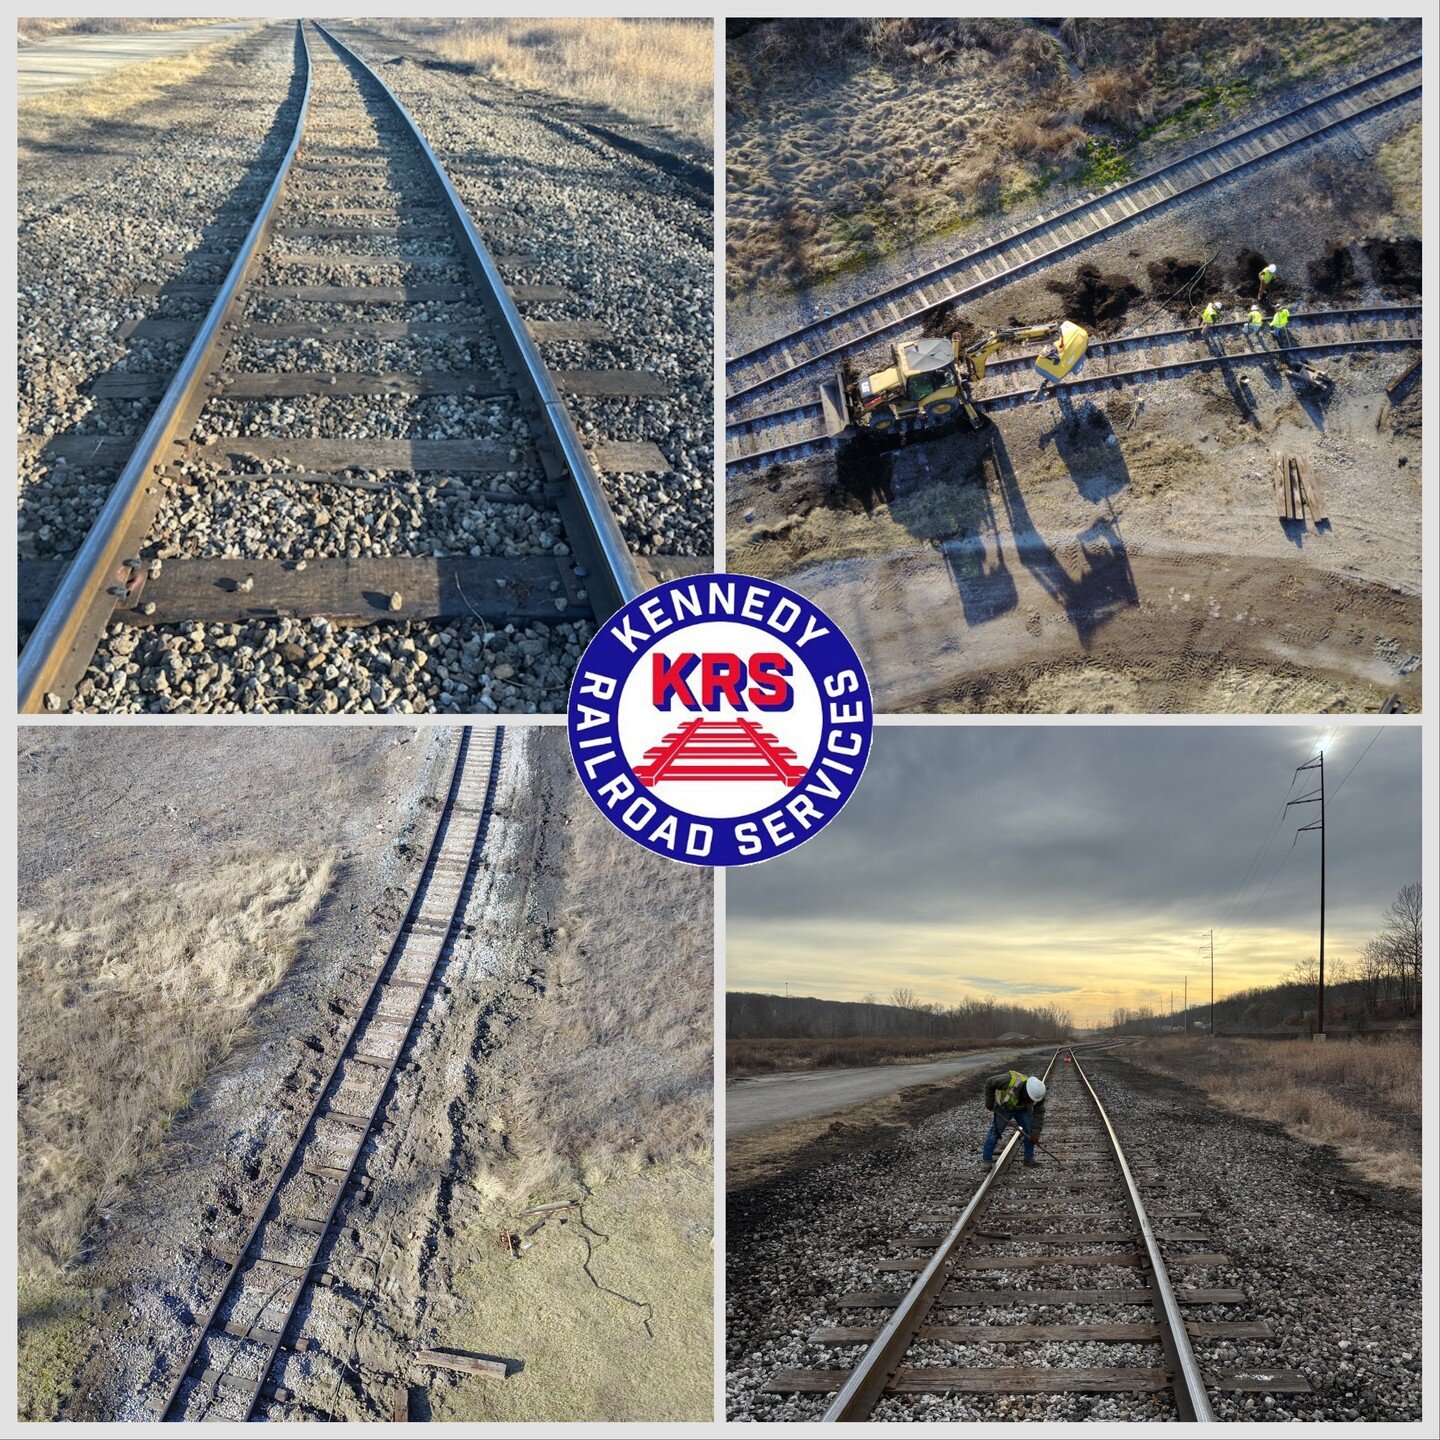 Finished up an industrial job this week. The nice weather was cooperating! Please consider Kennedy Railroad Services for all rail maintenance, design build and new construction projects. #kennedyrailroadservices #track #railsafety #railwayindustry #r